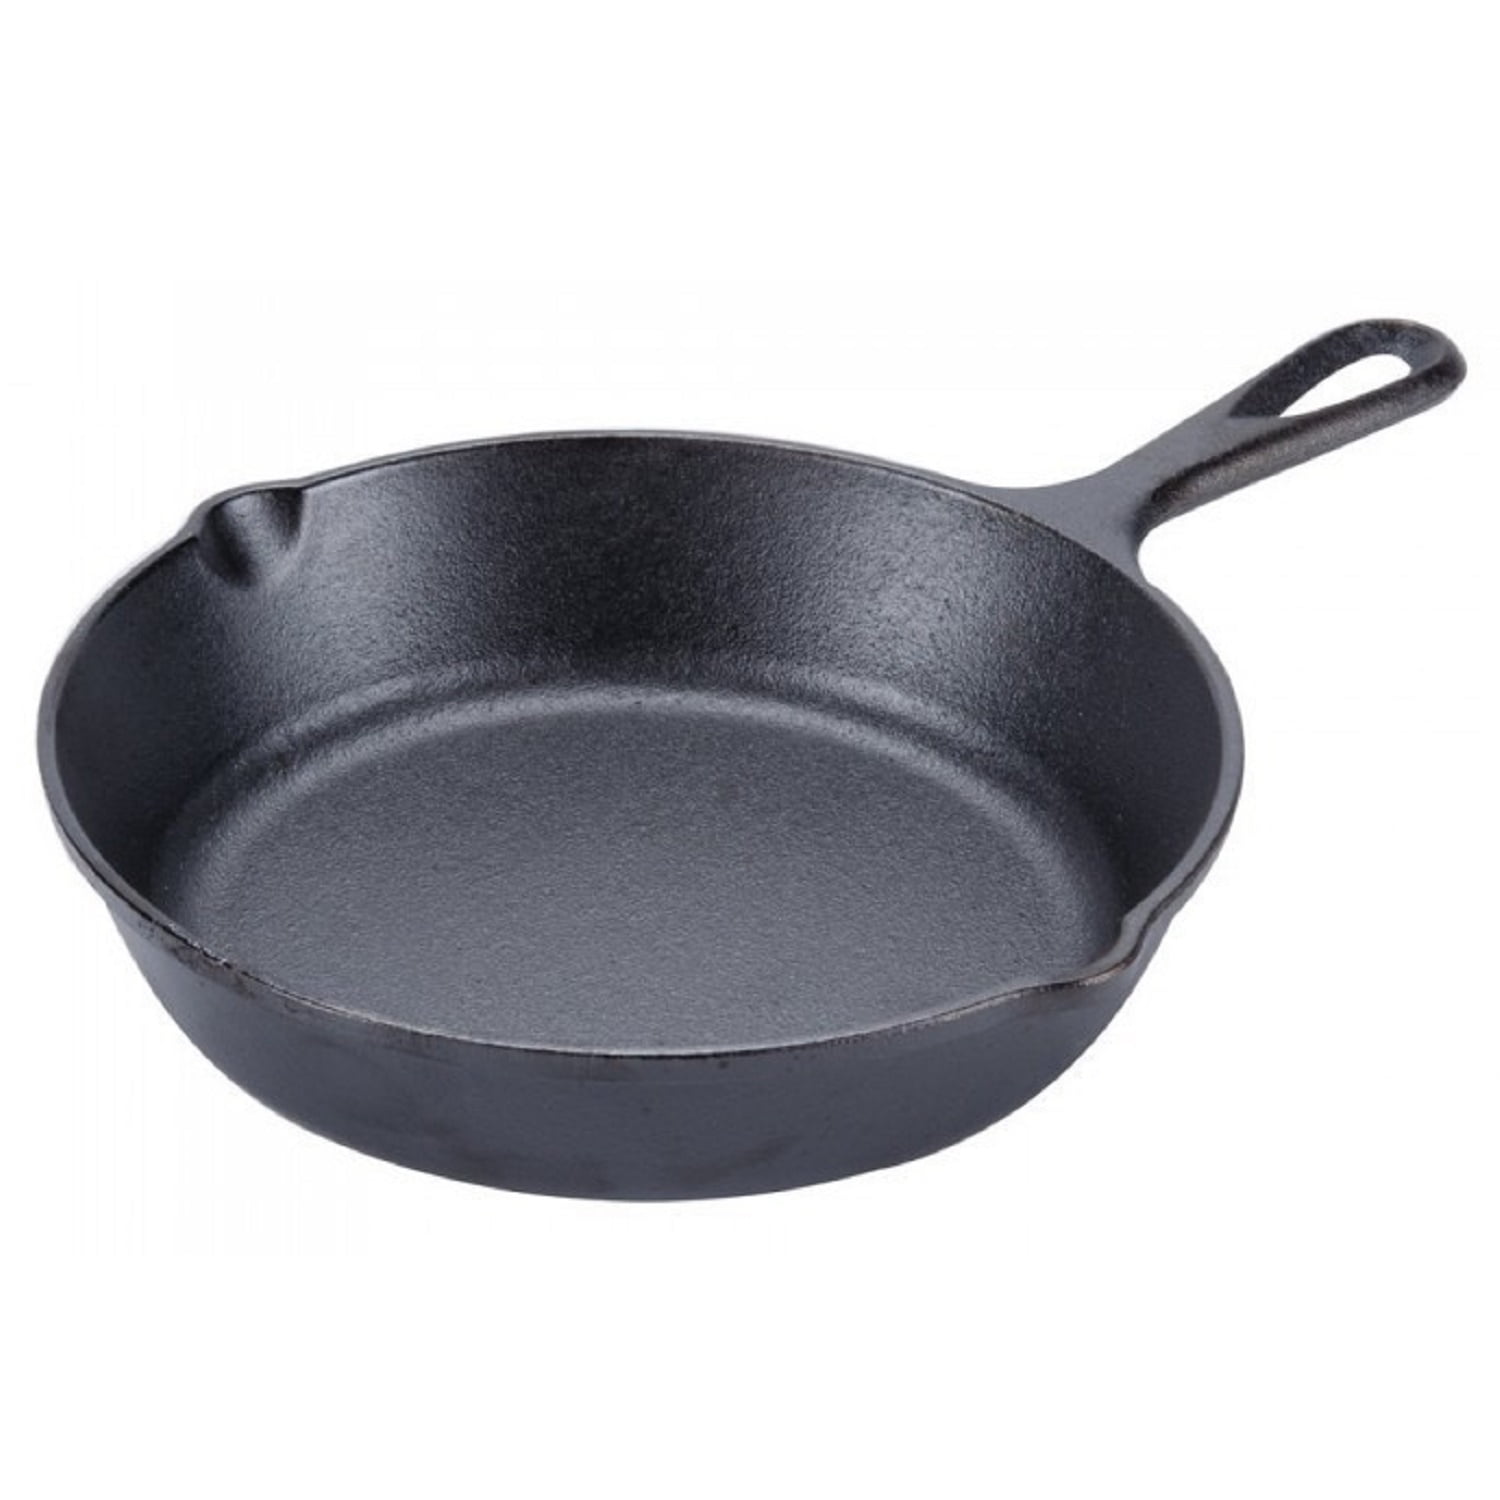 LODGE 6.5 Inch Cast Iron Grill Pan - SBL Limited